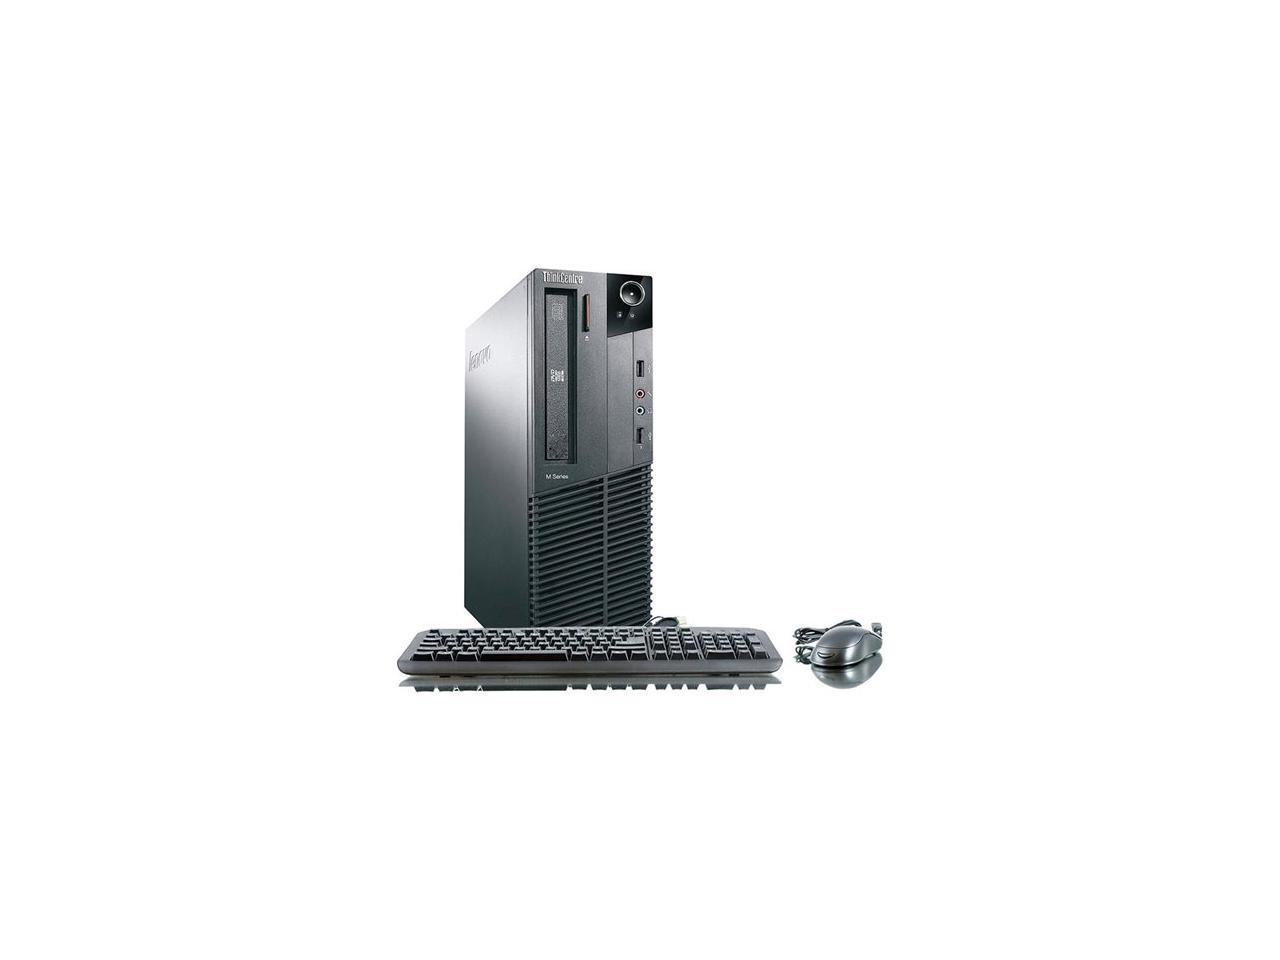 Lenovo ThinkCentre M91p Intel i5 2400 3.10Ghz 8GB 500GB DVD Windows 10 Pro With New Keyboard & Mouse